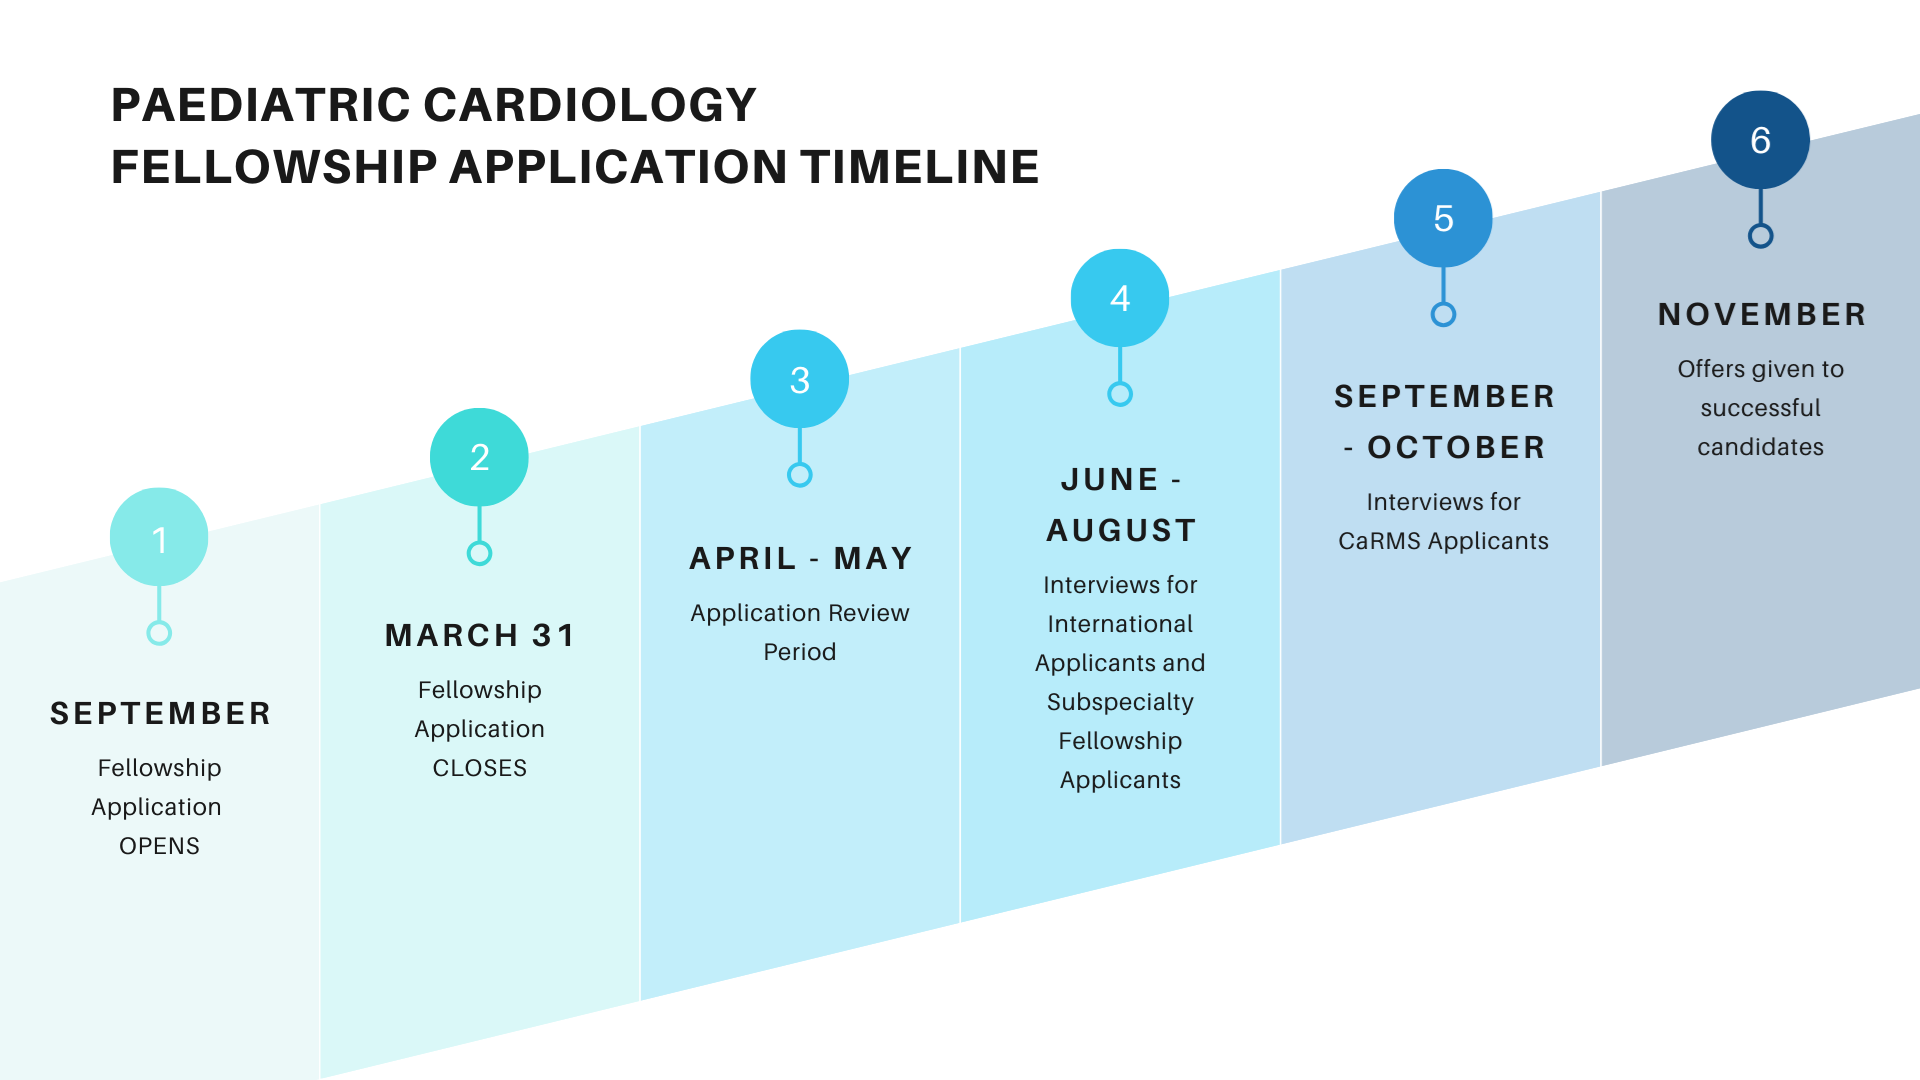 Paediatric Cardiology Fellowship  application timeline that includes application submission, application review period, interviews and offers given to successful candidates.